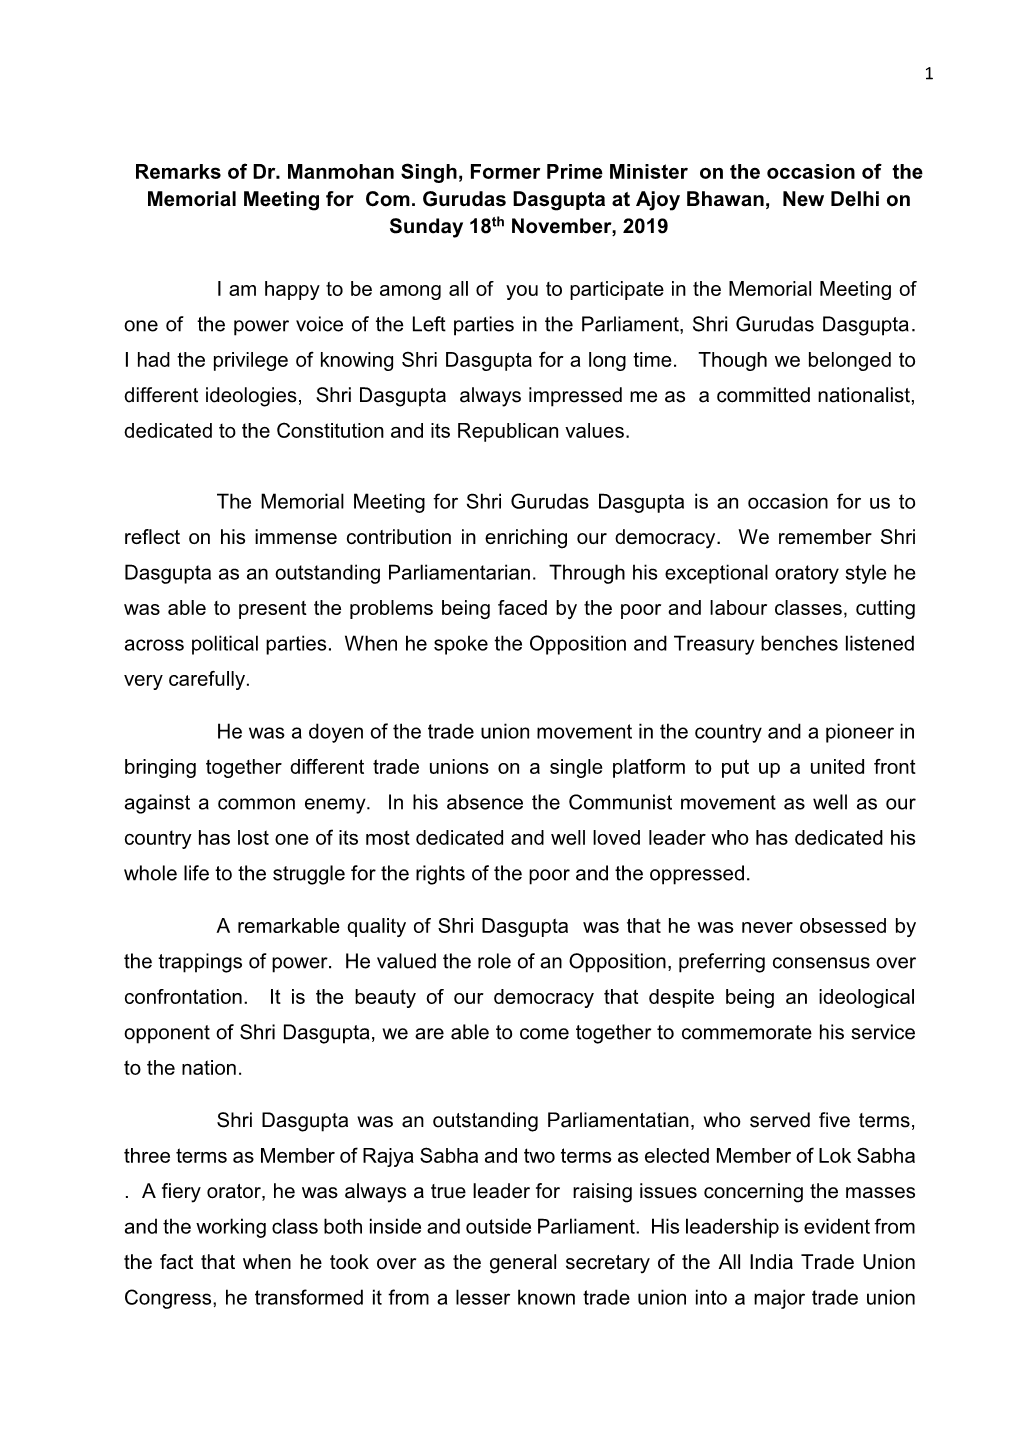 Remarks of Dr. Manmohan Singh, Former Prime Minister on the Occasion of the Memorial Meeting for Com